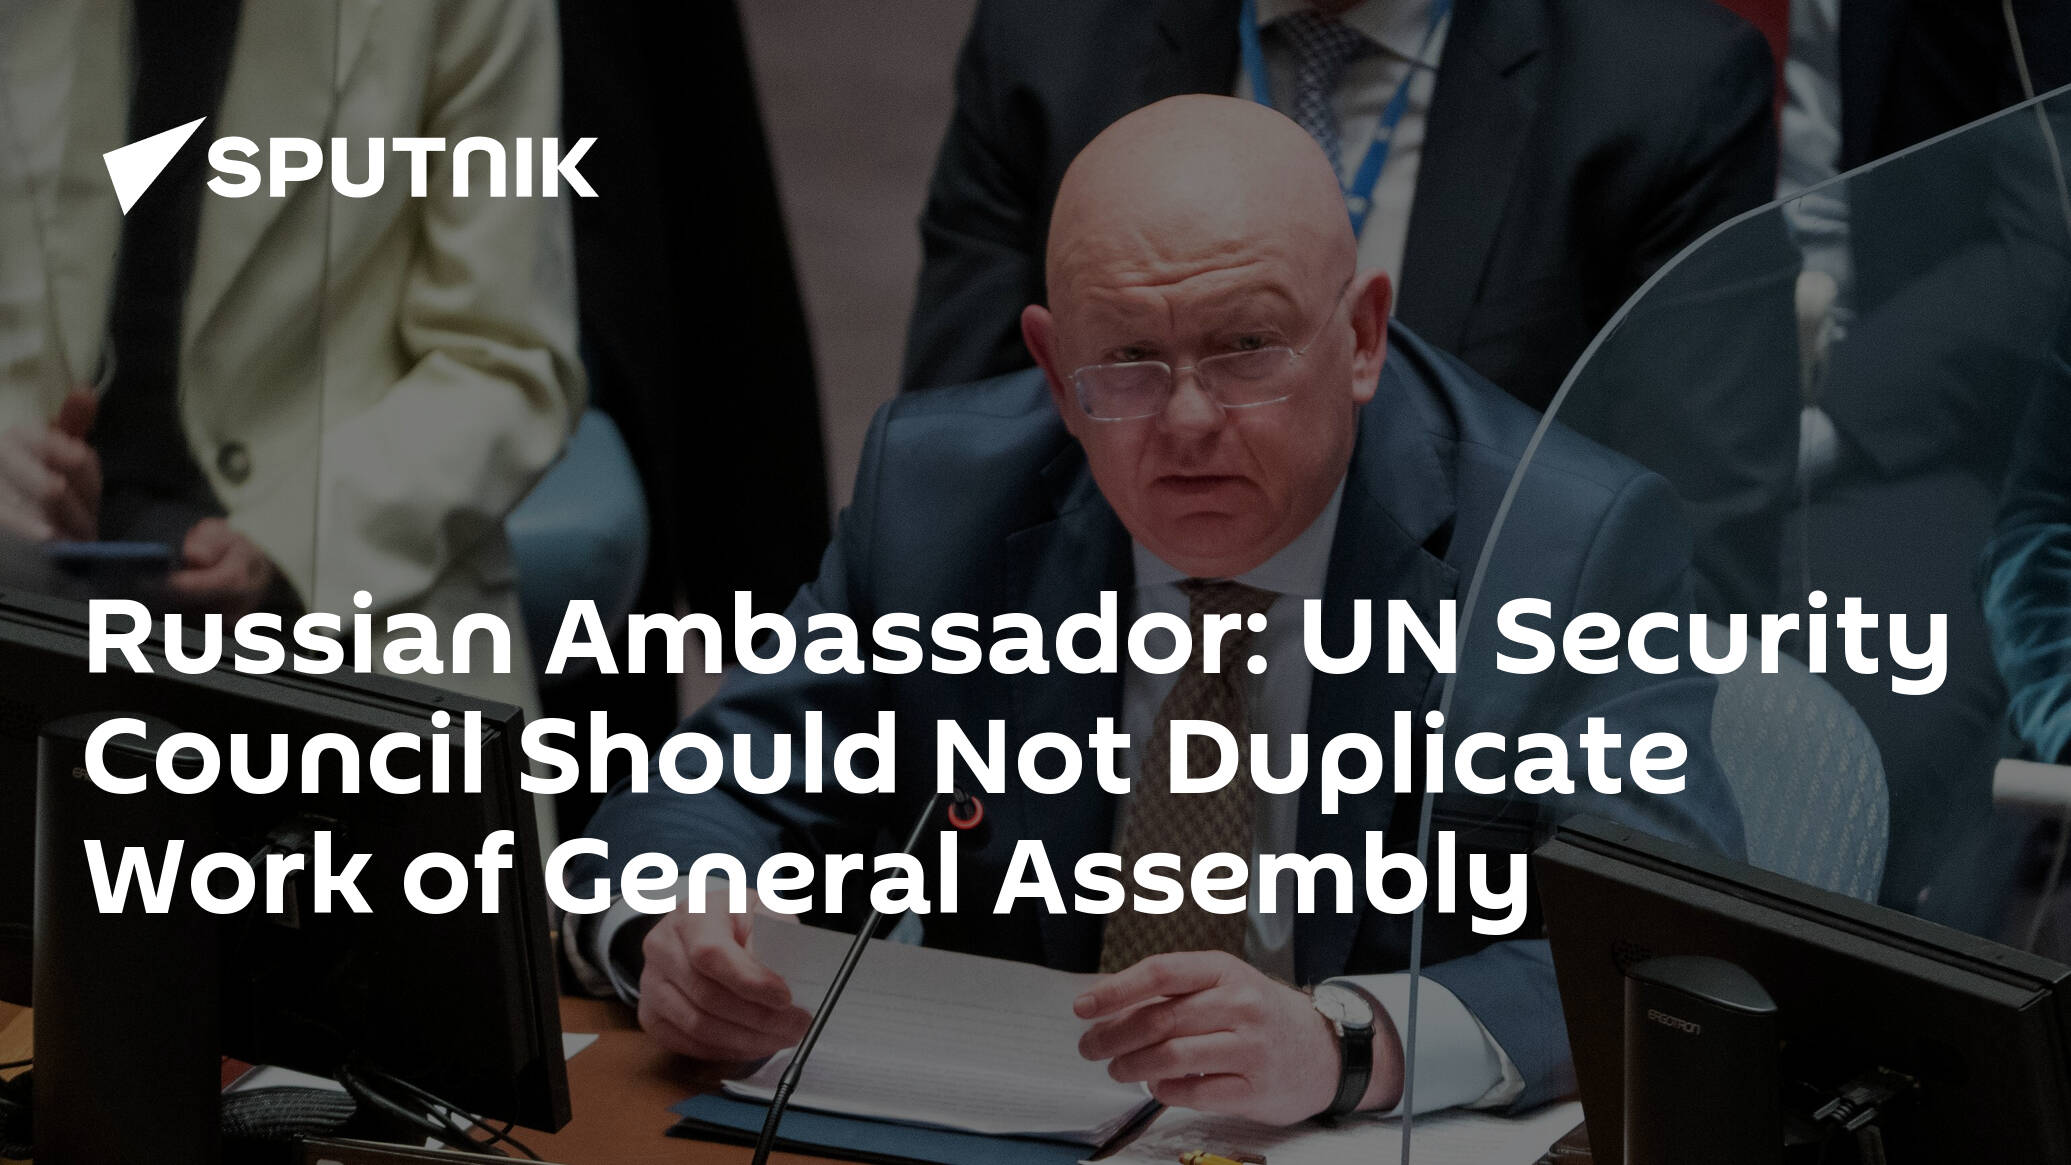 Russian Ambassador: UN Security Council Should Not Duplicate Work of General Assembly